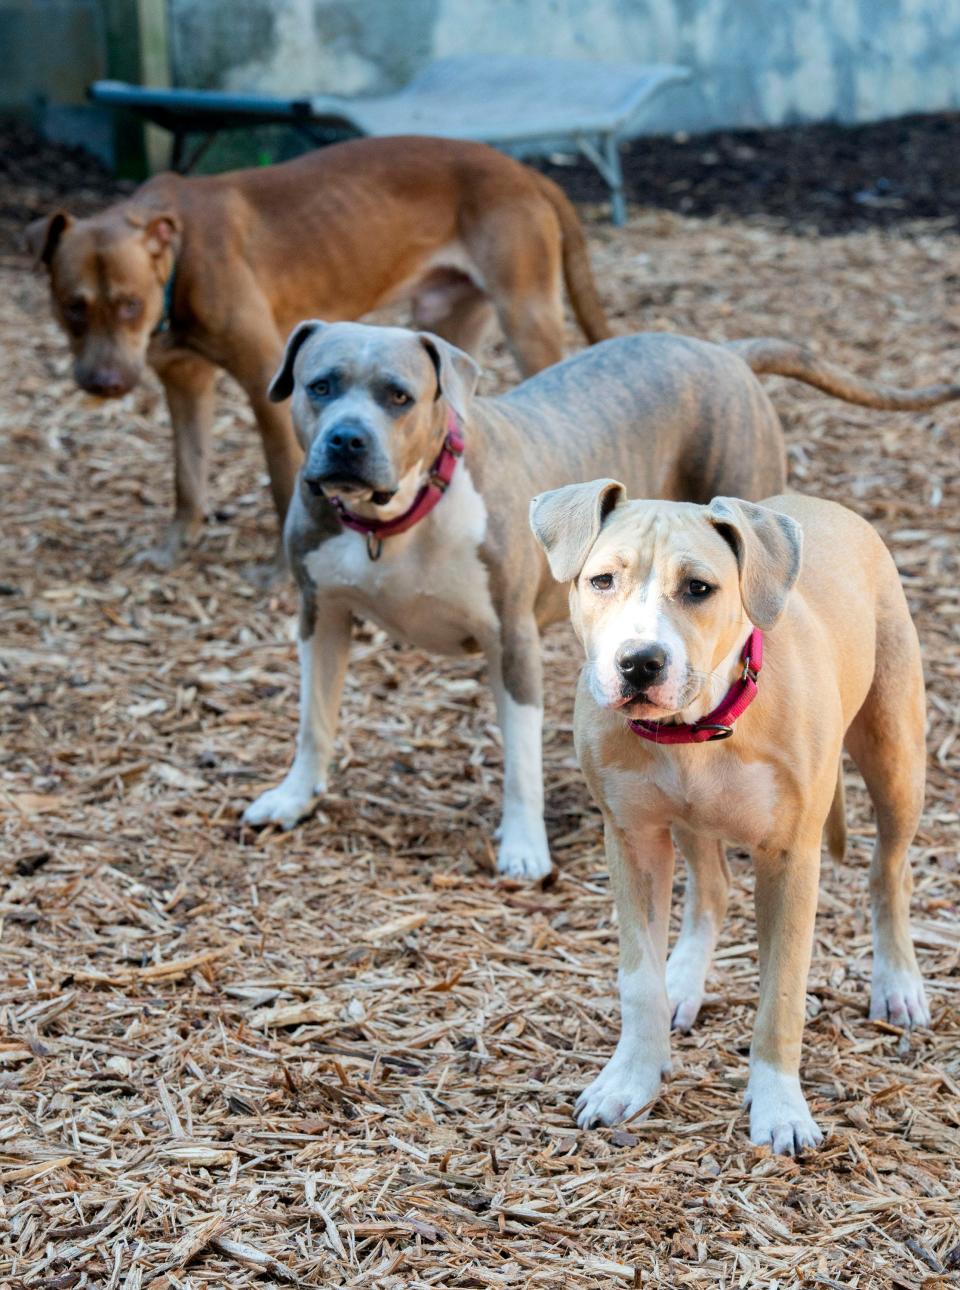 Jake from State Farm, London, and Frannie are three dogs ready for adoption at the Phoenix Rising Rescue Shelter on Thursday, Oct. 19, 2023. Phoenix Rising specializes in sheltering and finding permanent homes for bully-breed dogs.